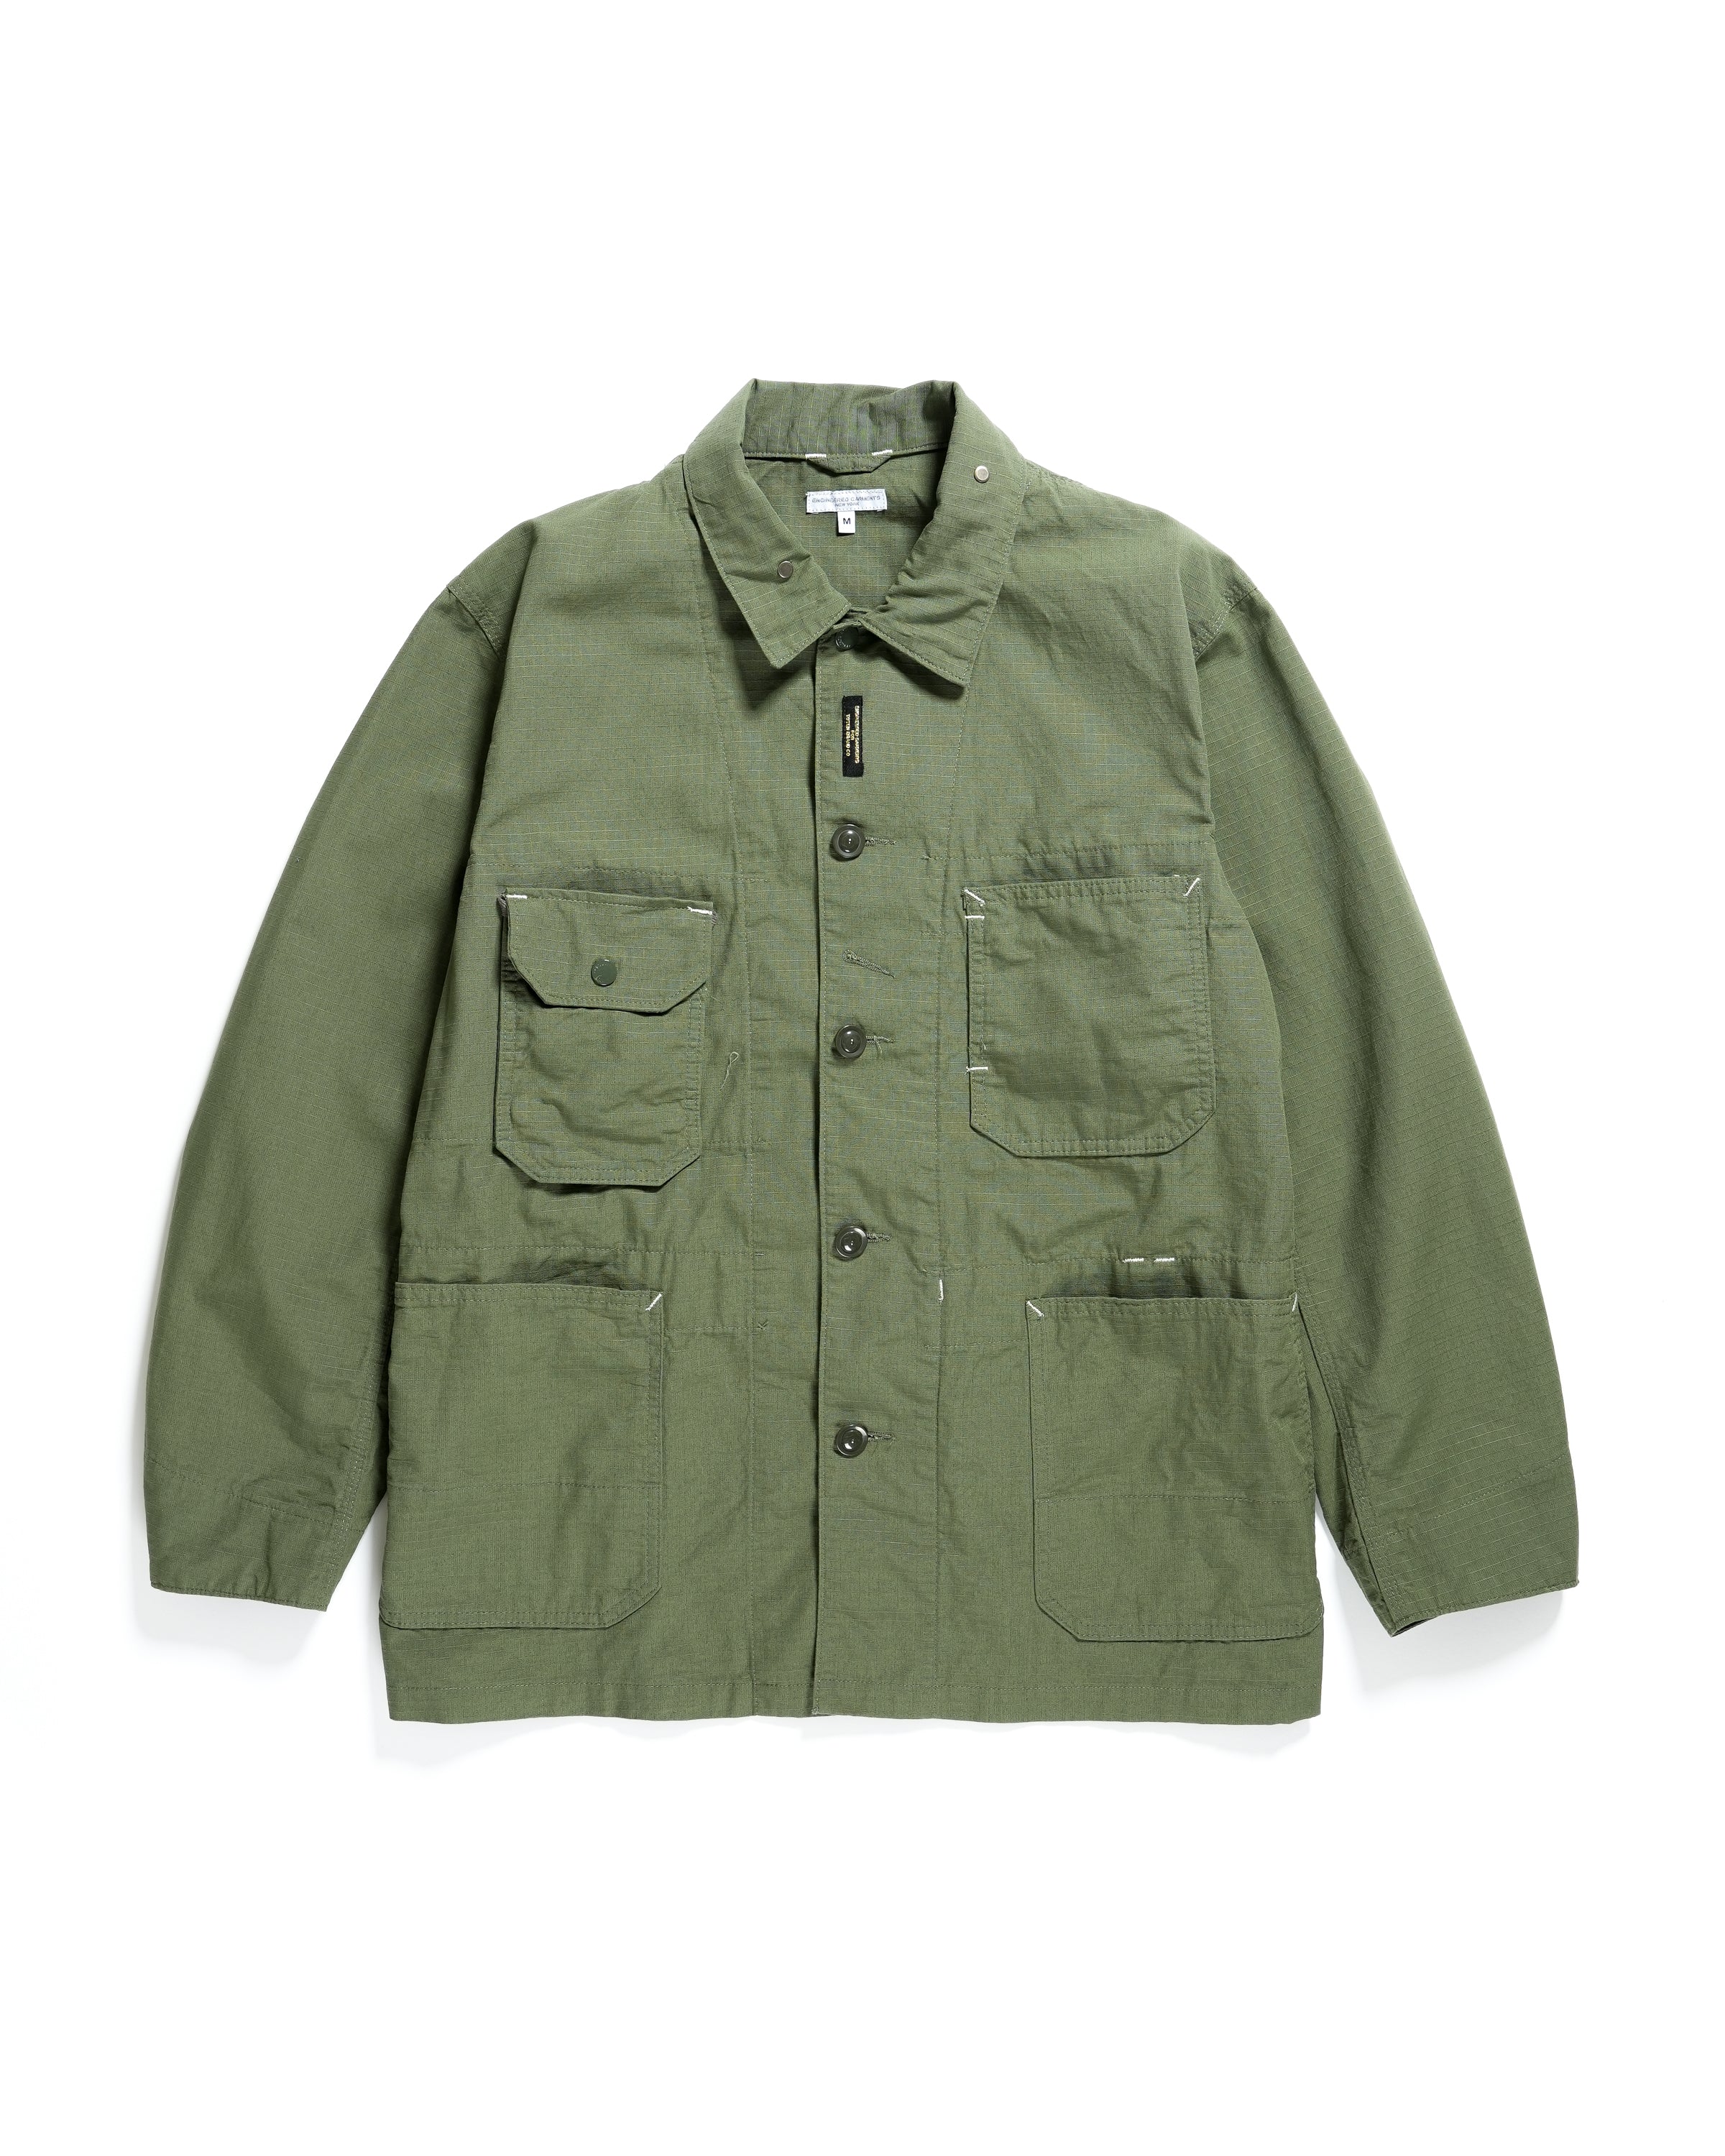 FU Coverall Jacket for Totem - Olive Cotton Ripstop